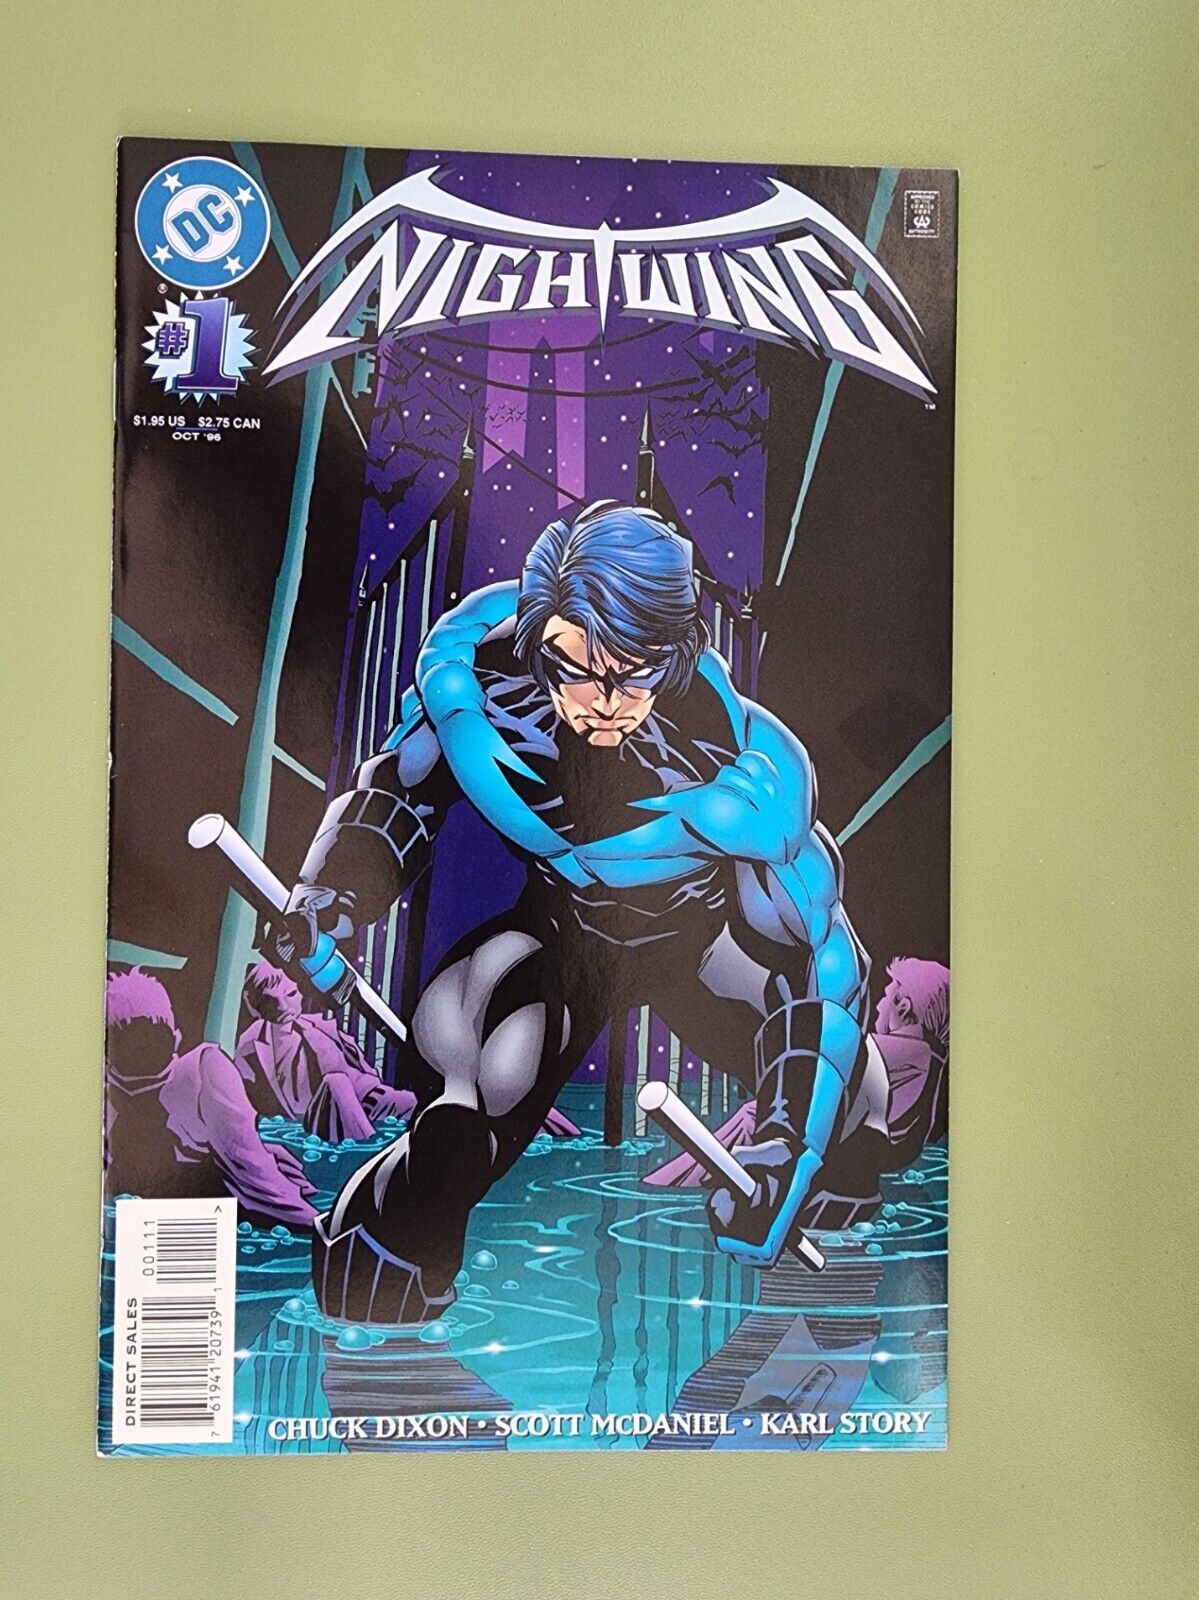 Nightwing #1 - DC Comics Oct '96 KEY - 1st Solo Series - 1st Bludhaven - NM- 9.2